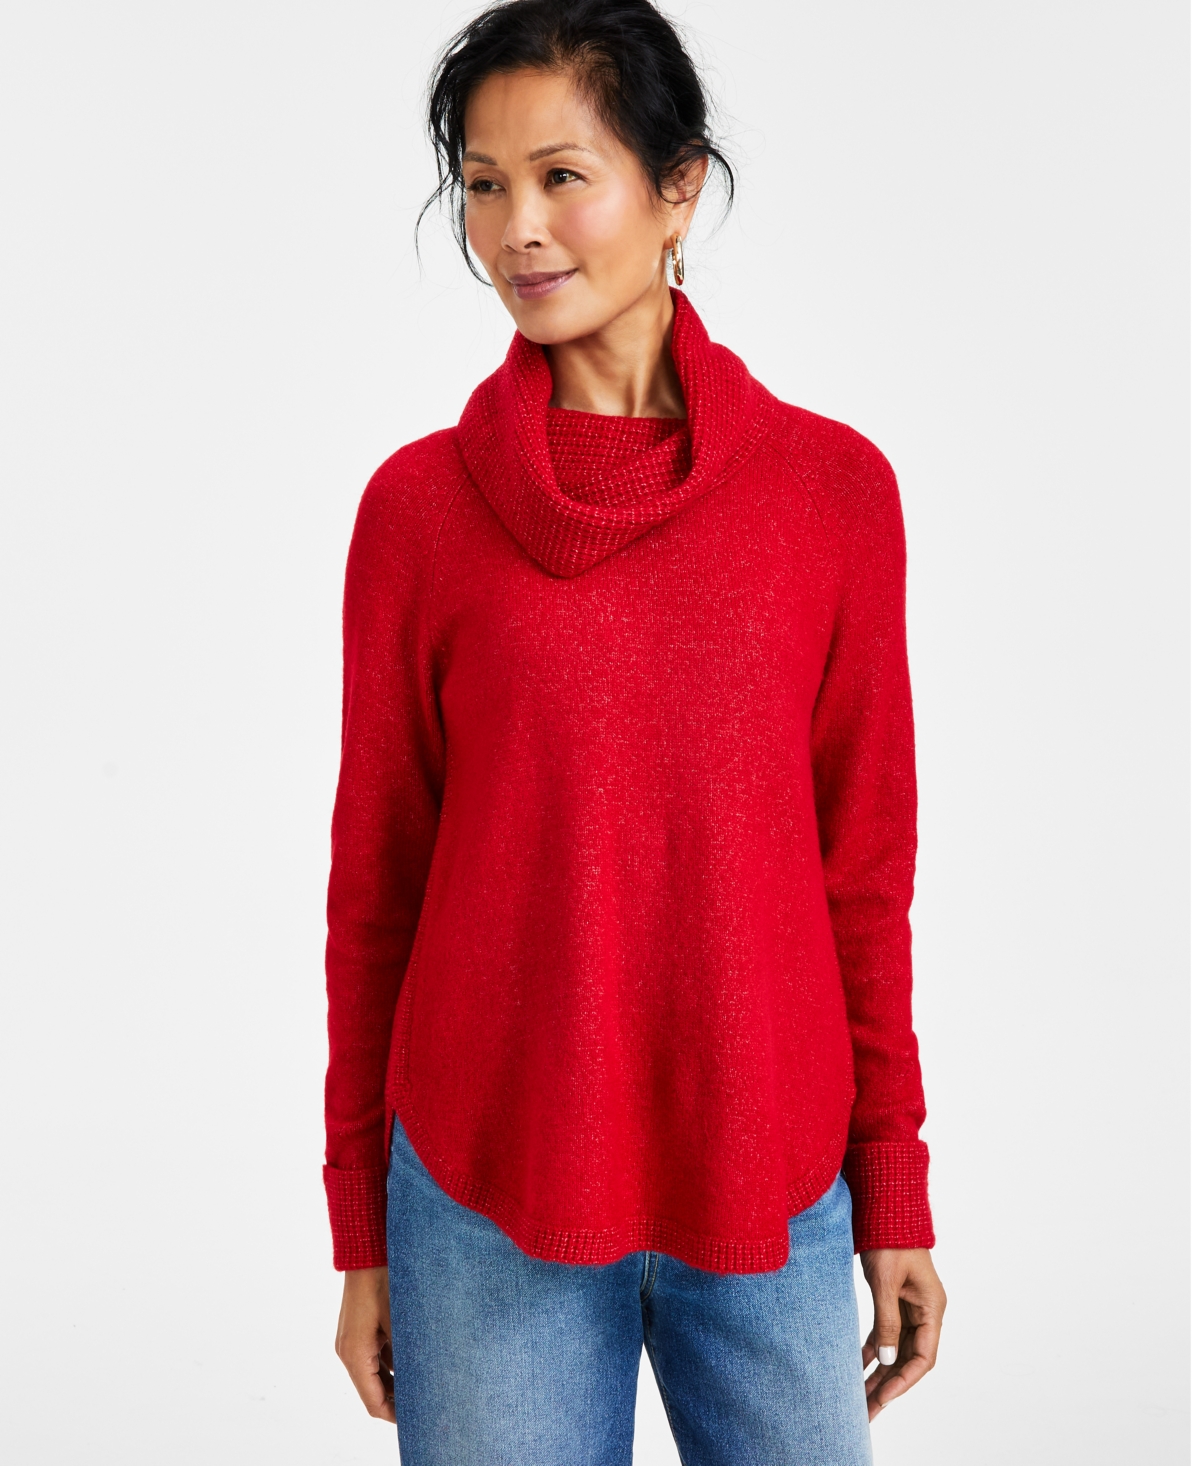 STYLE & CO PETITE WAFFLE COWLNECK SWEATER, CREATED FOR MACY'S